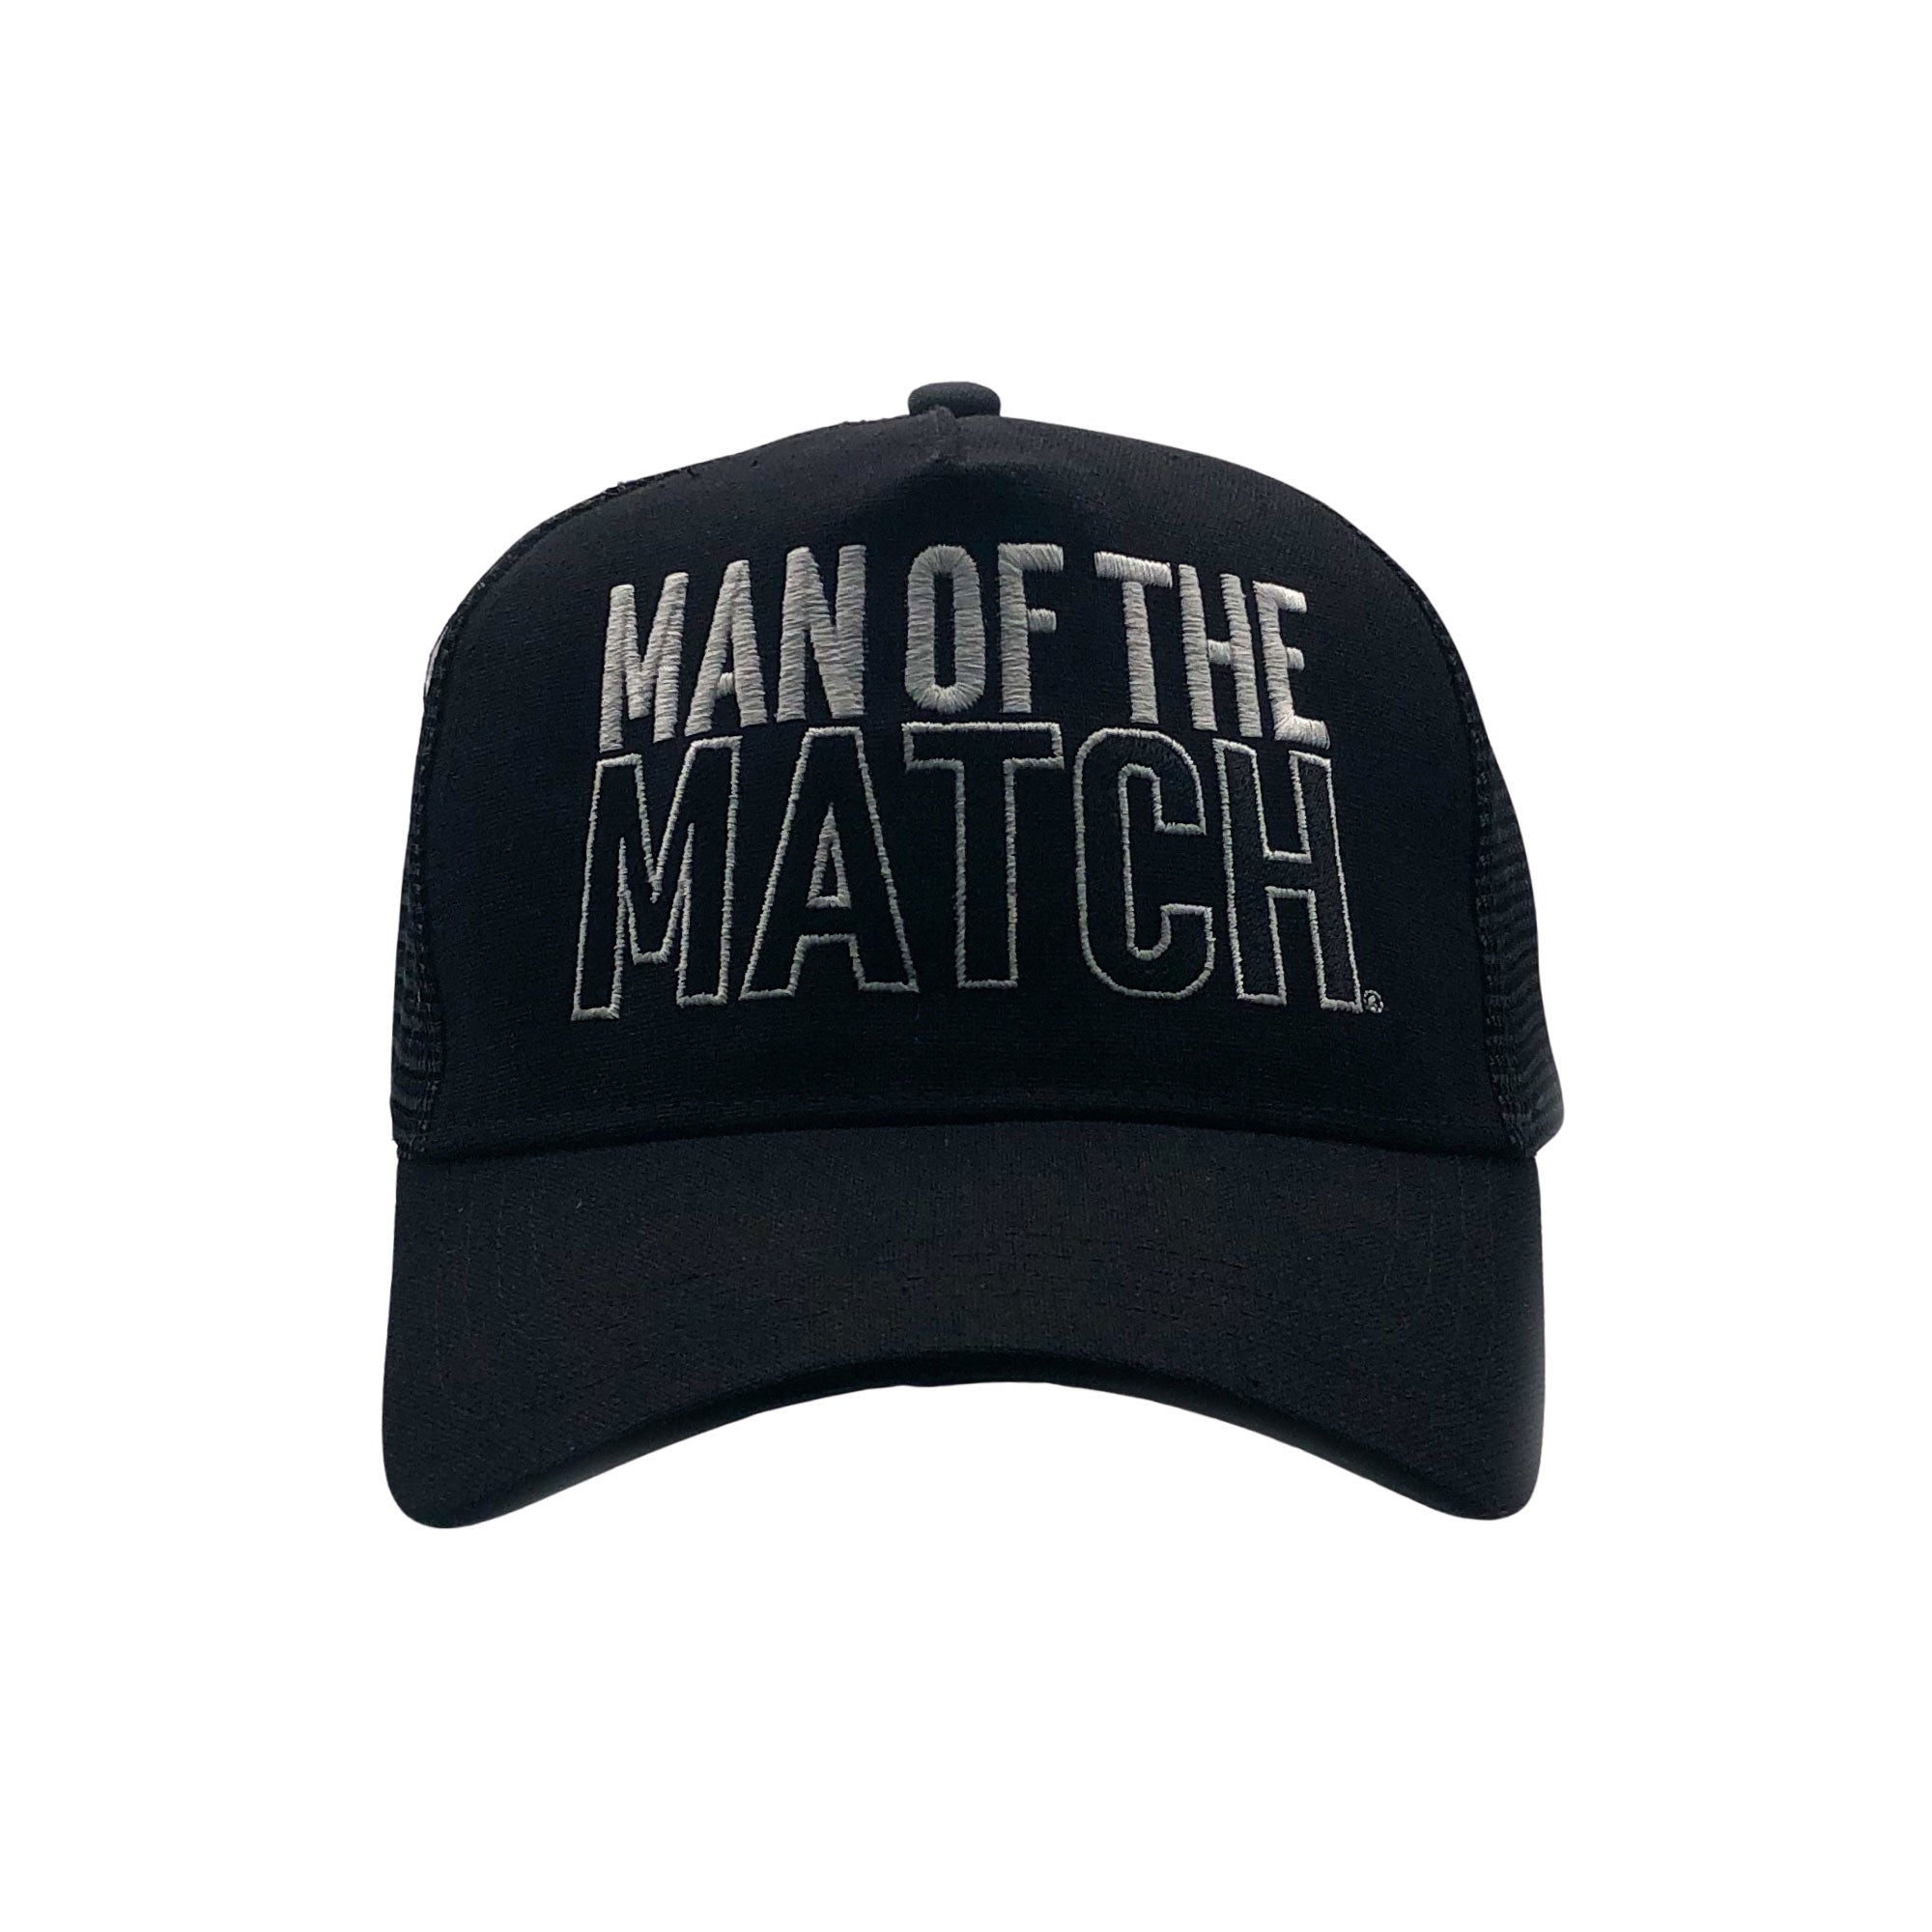 MAN OF THE MATCH® Roberto Carlos Official Cap - Embroidered White on Black - Premium Linen